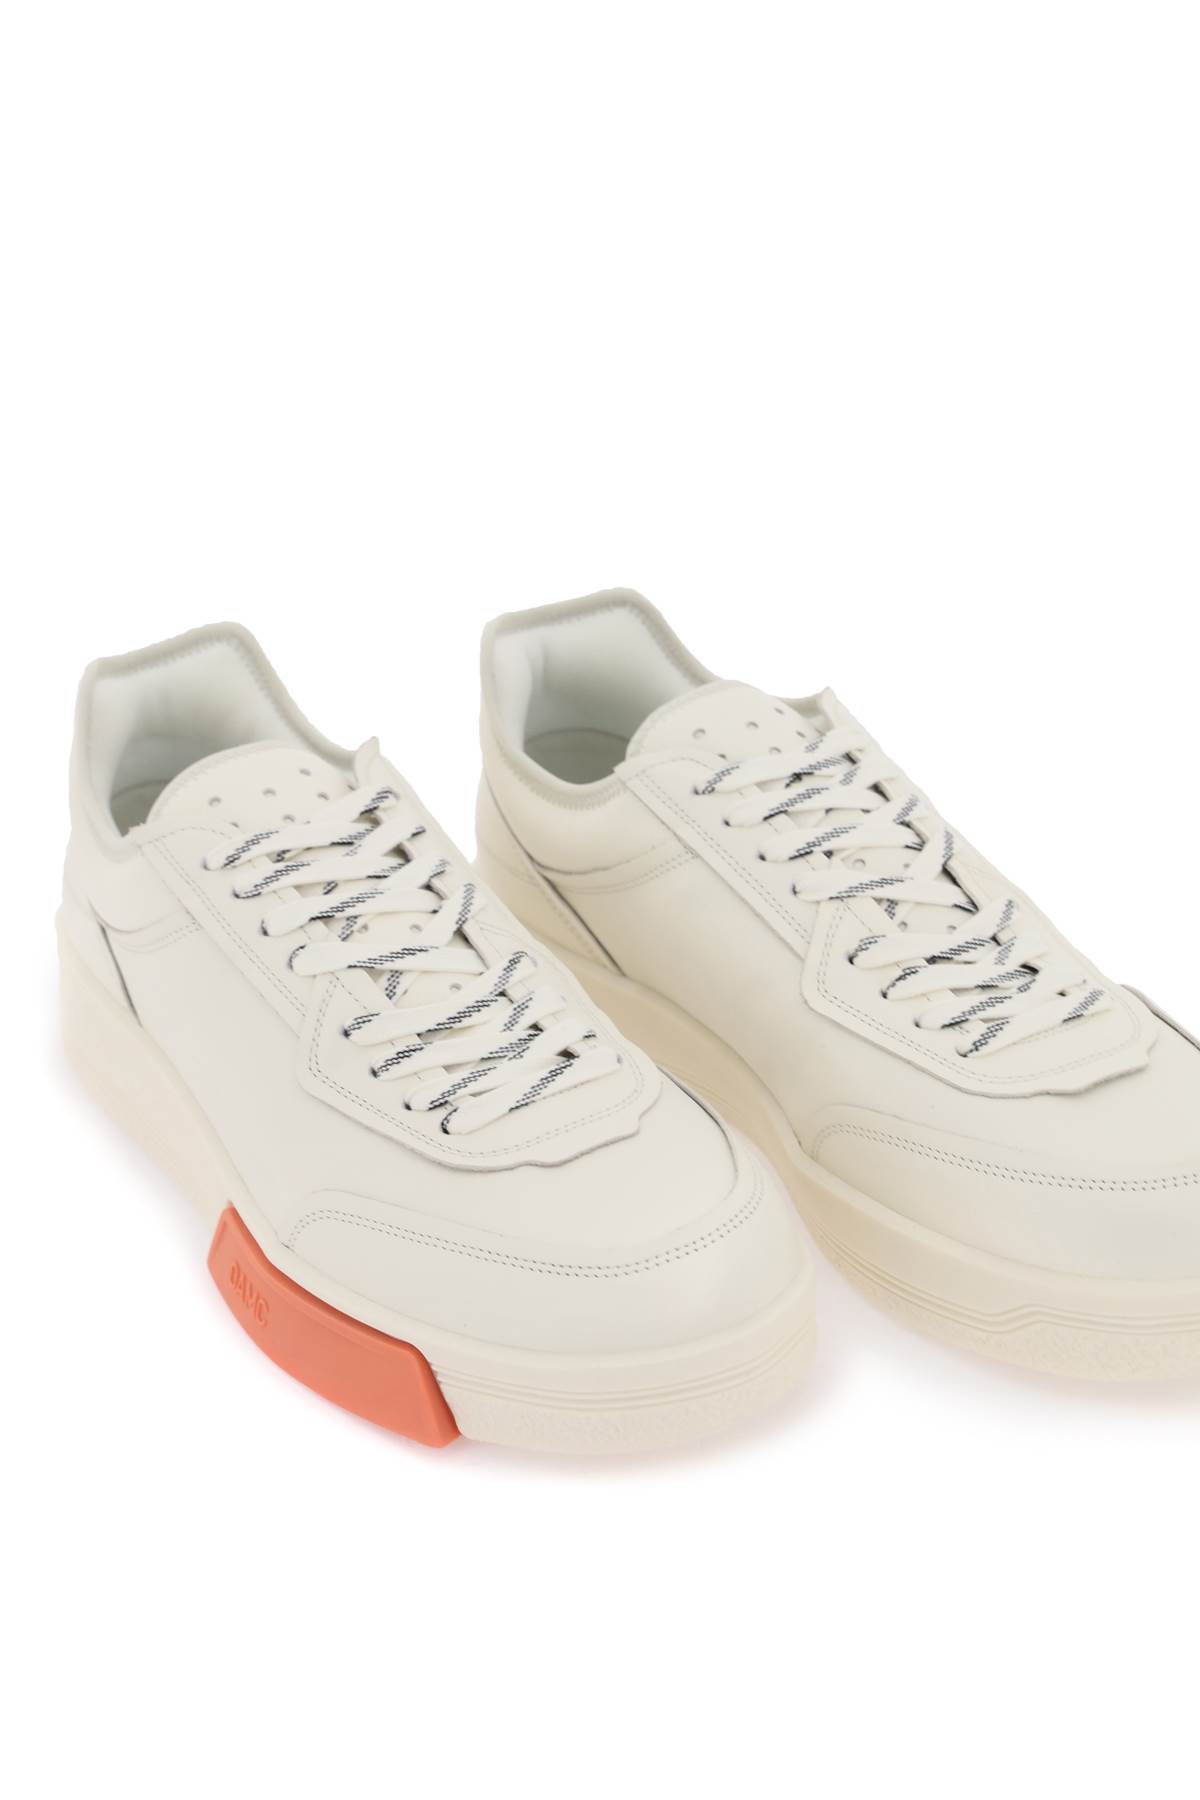 Shop Oamc Cosmos Cupsole Sneakers In White